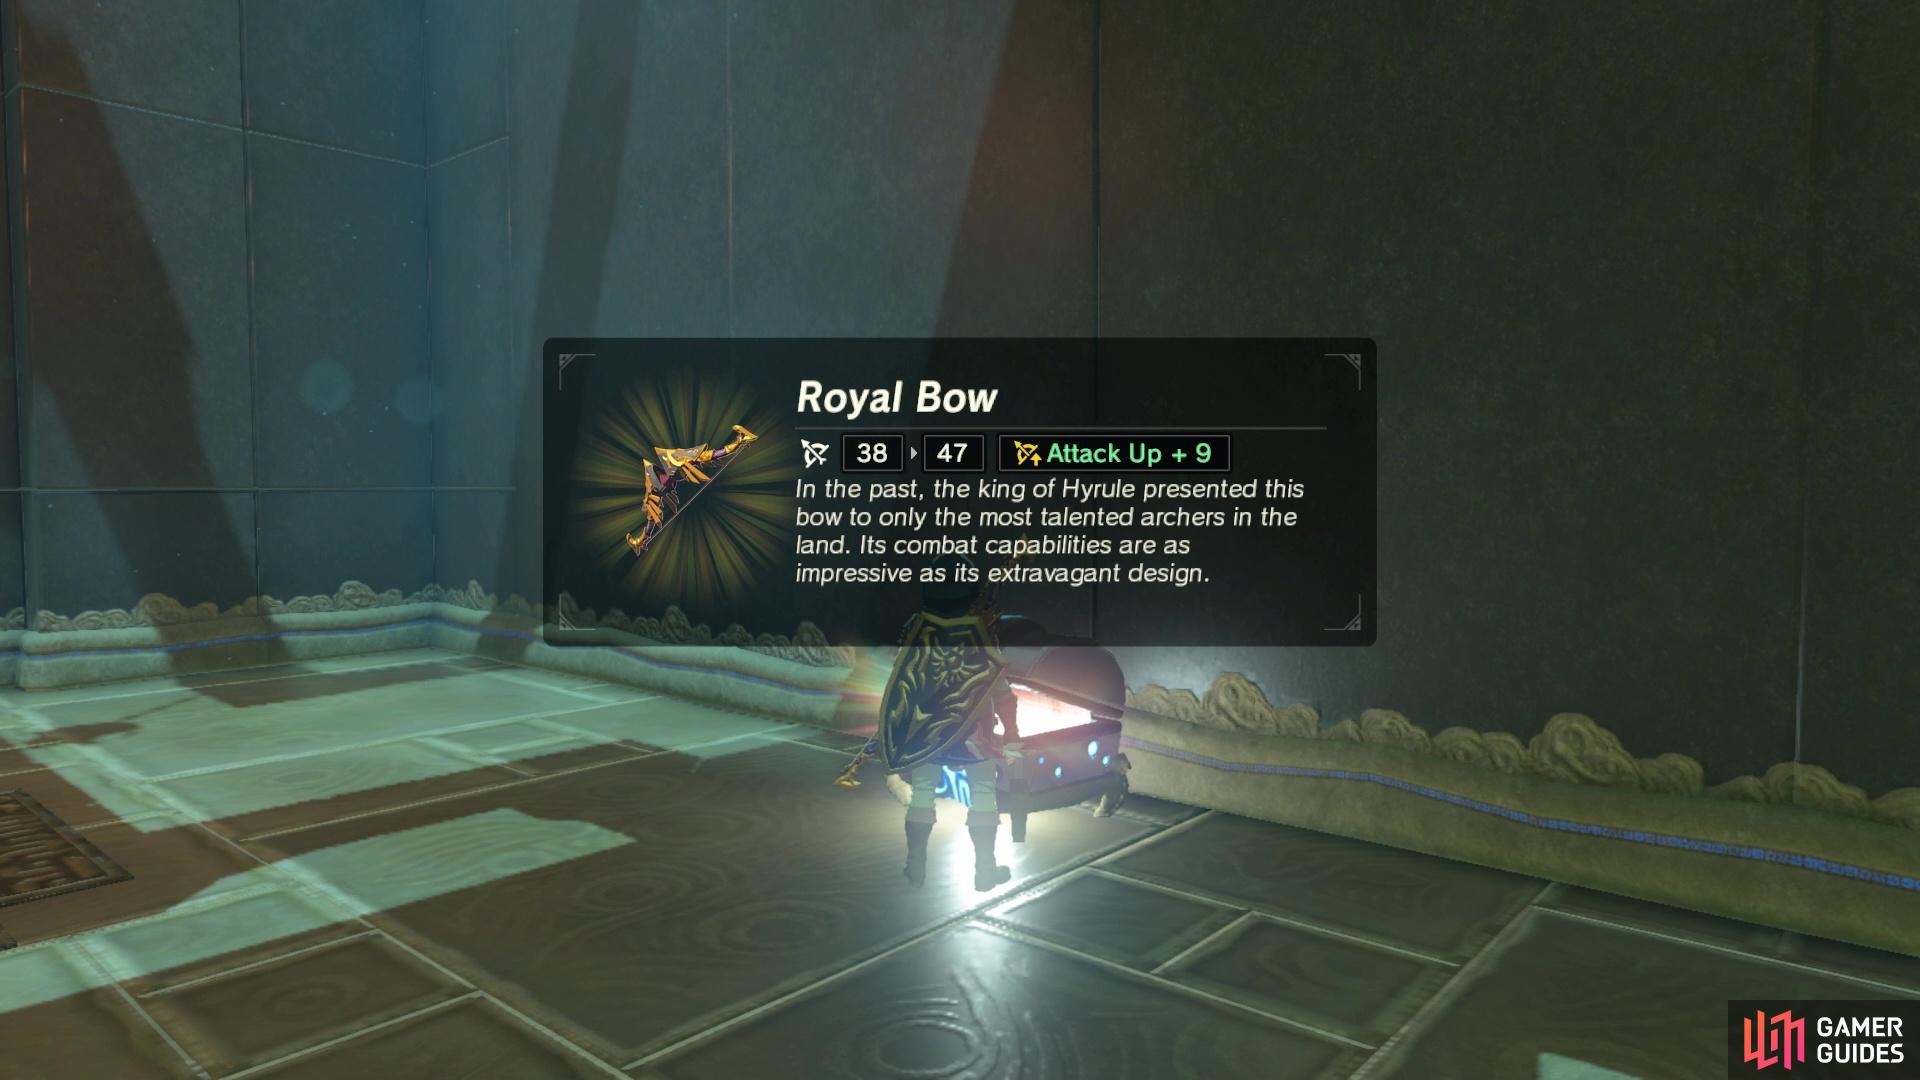 so you can grab the treasure chest and loot it for a Royal Bow.